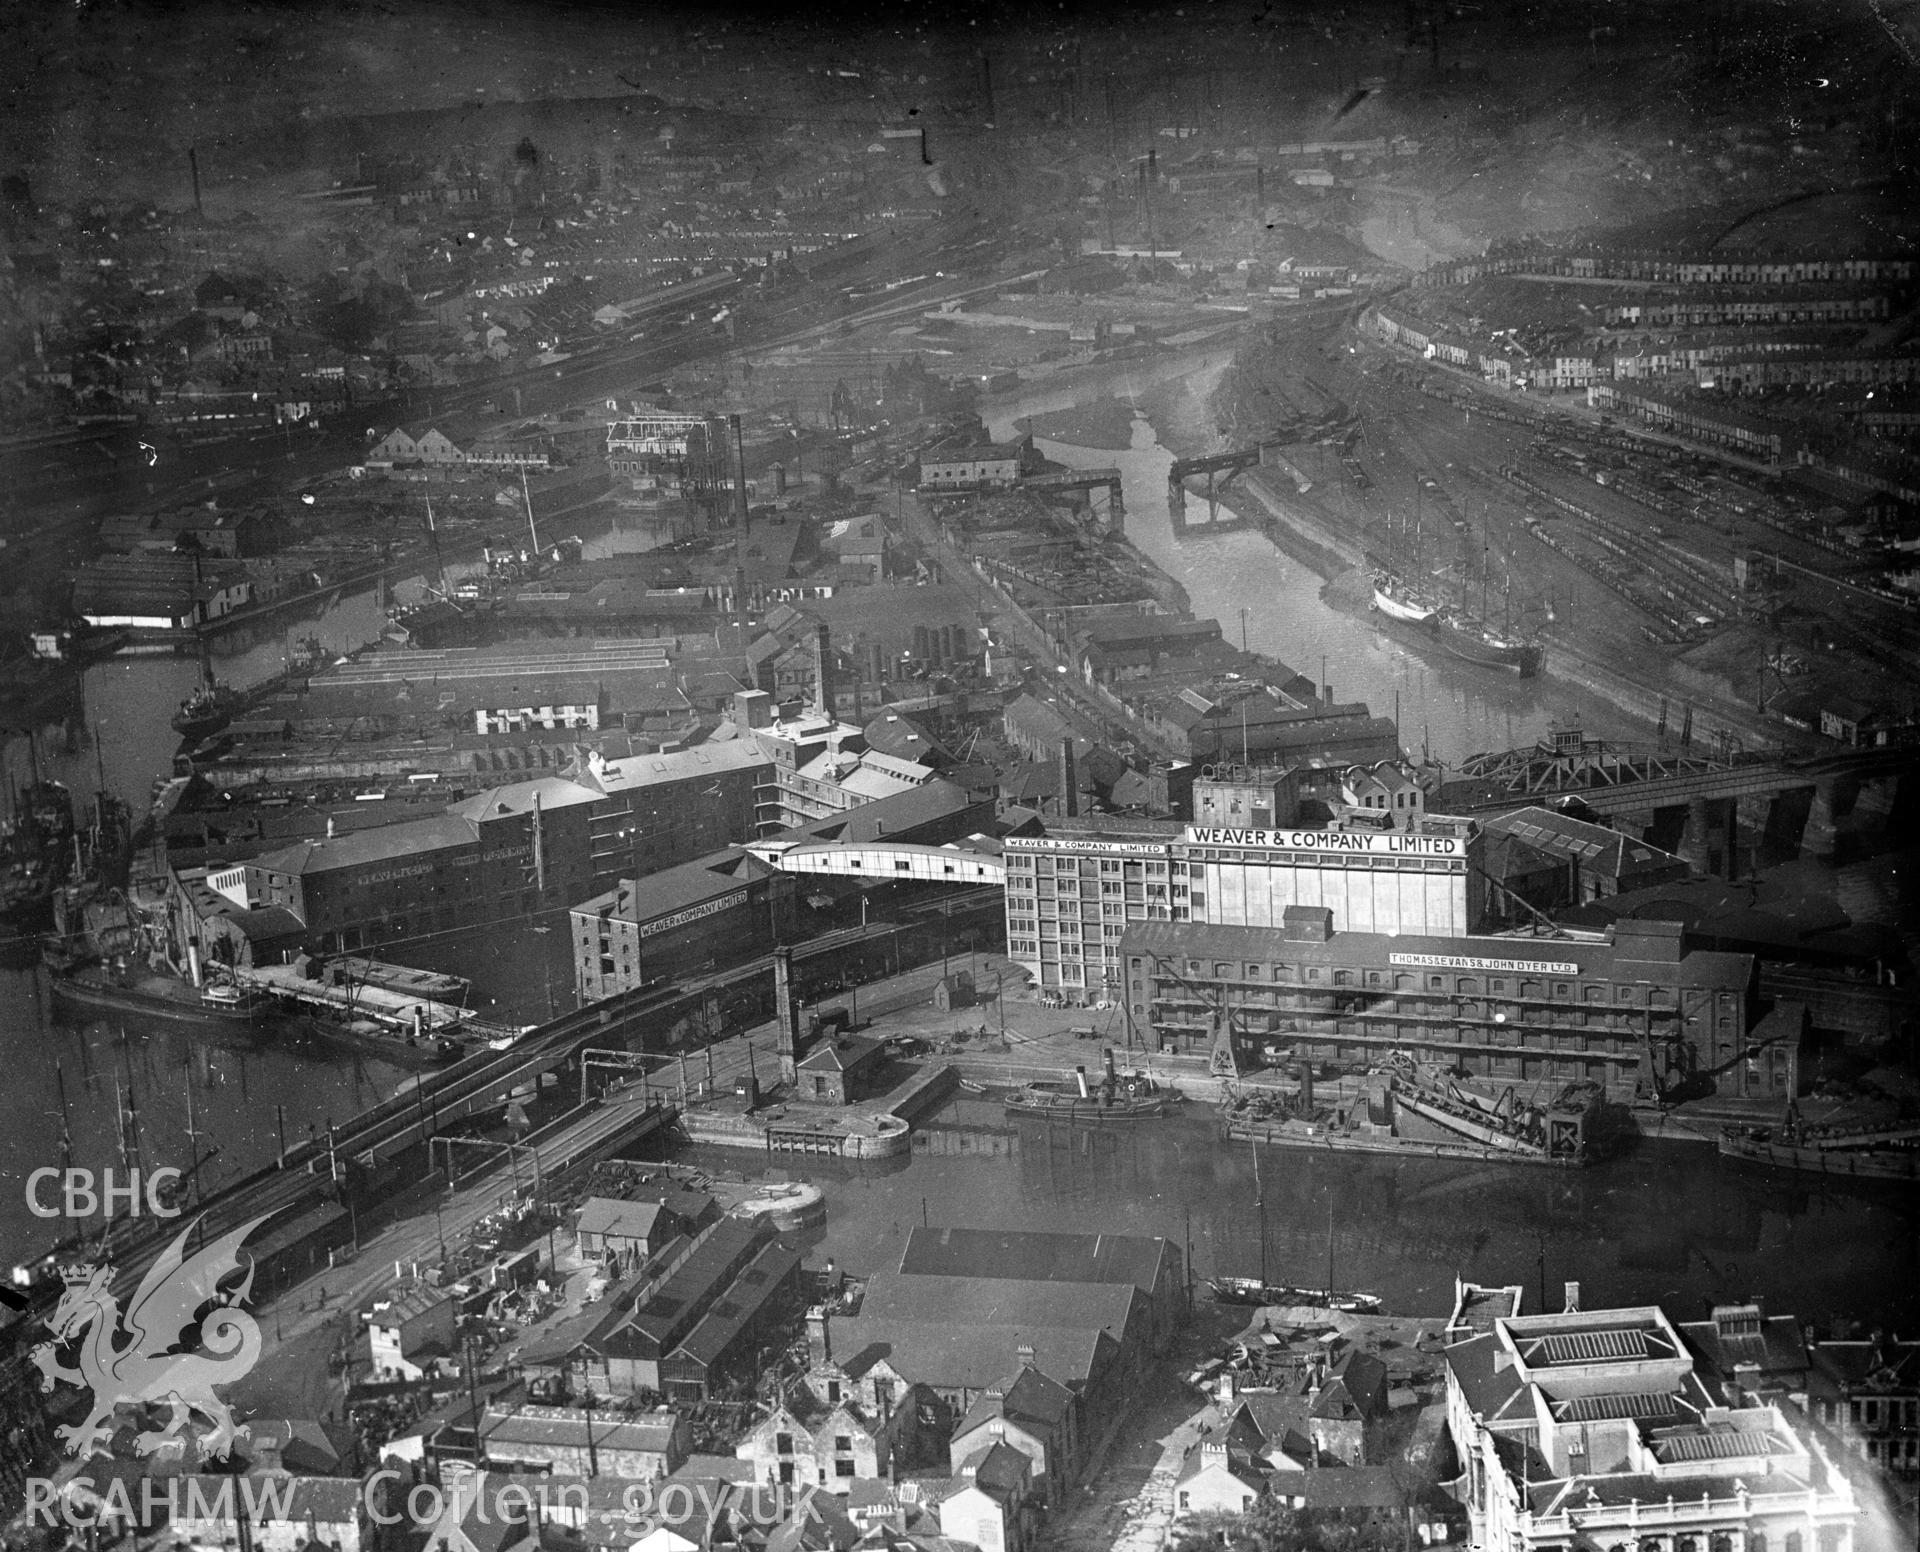 View of Weaver's Flour Mill, Swansea, oblique aerial view. 5?x4? black and white glass plate negative.